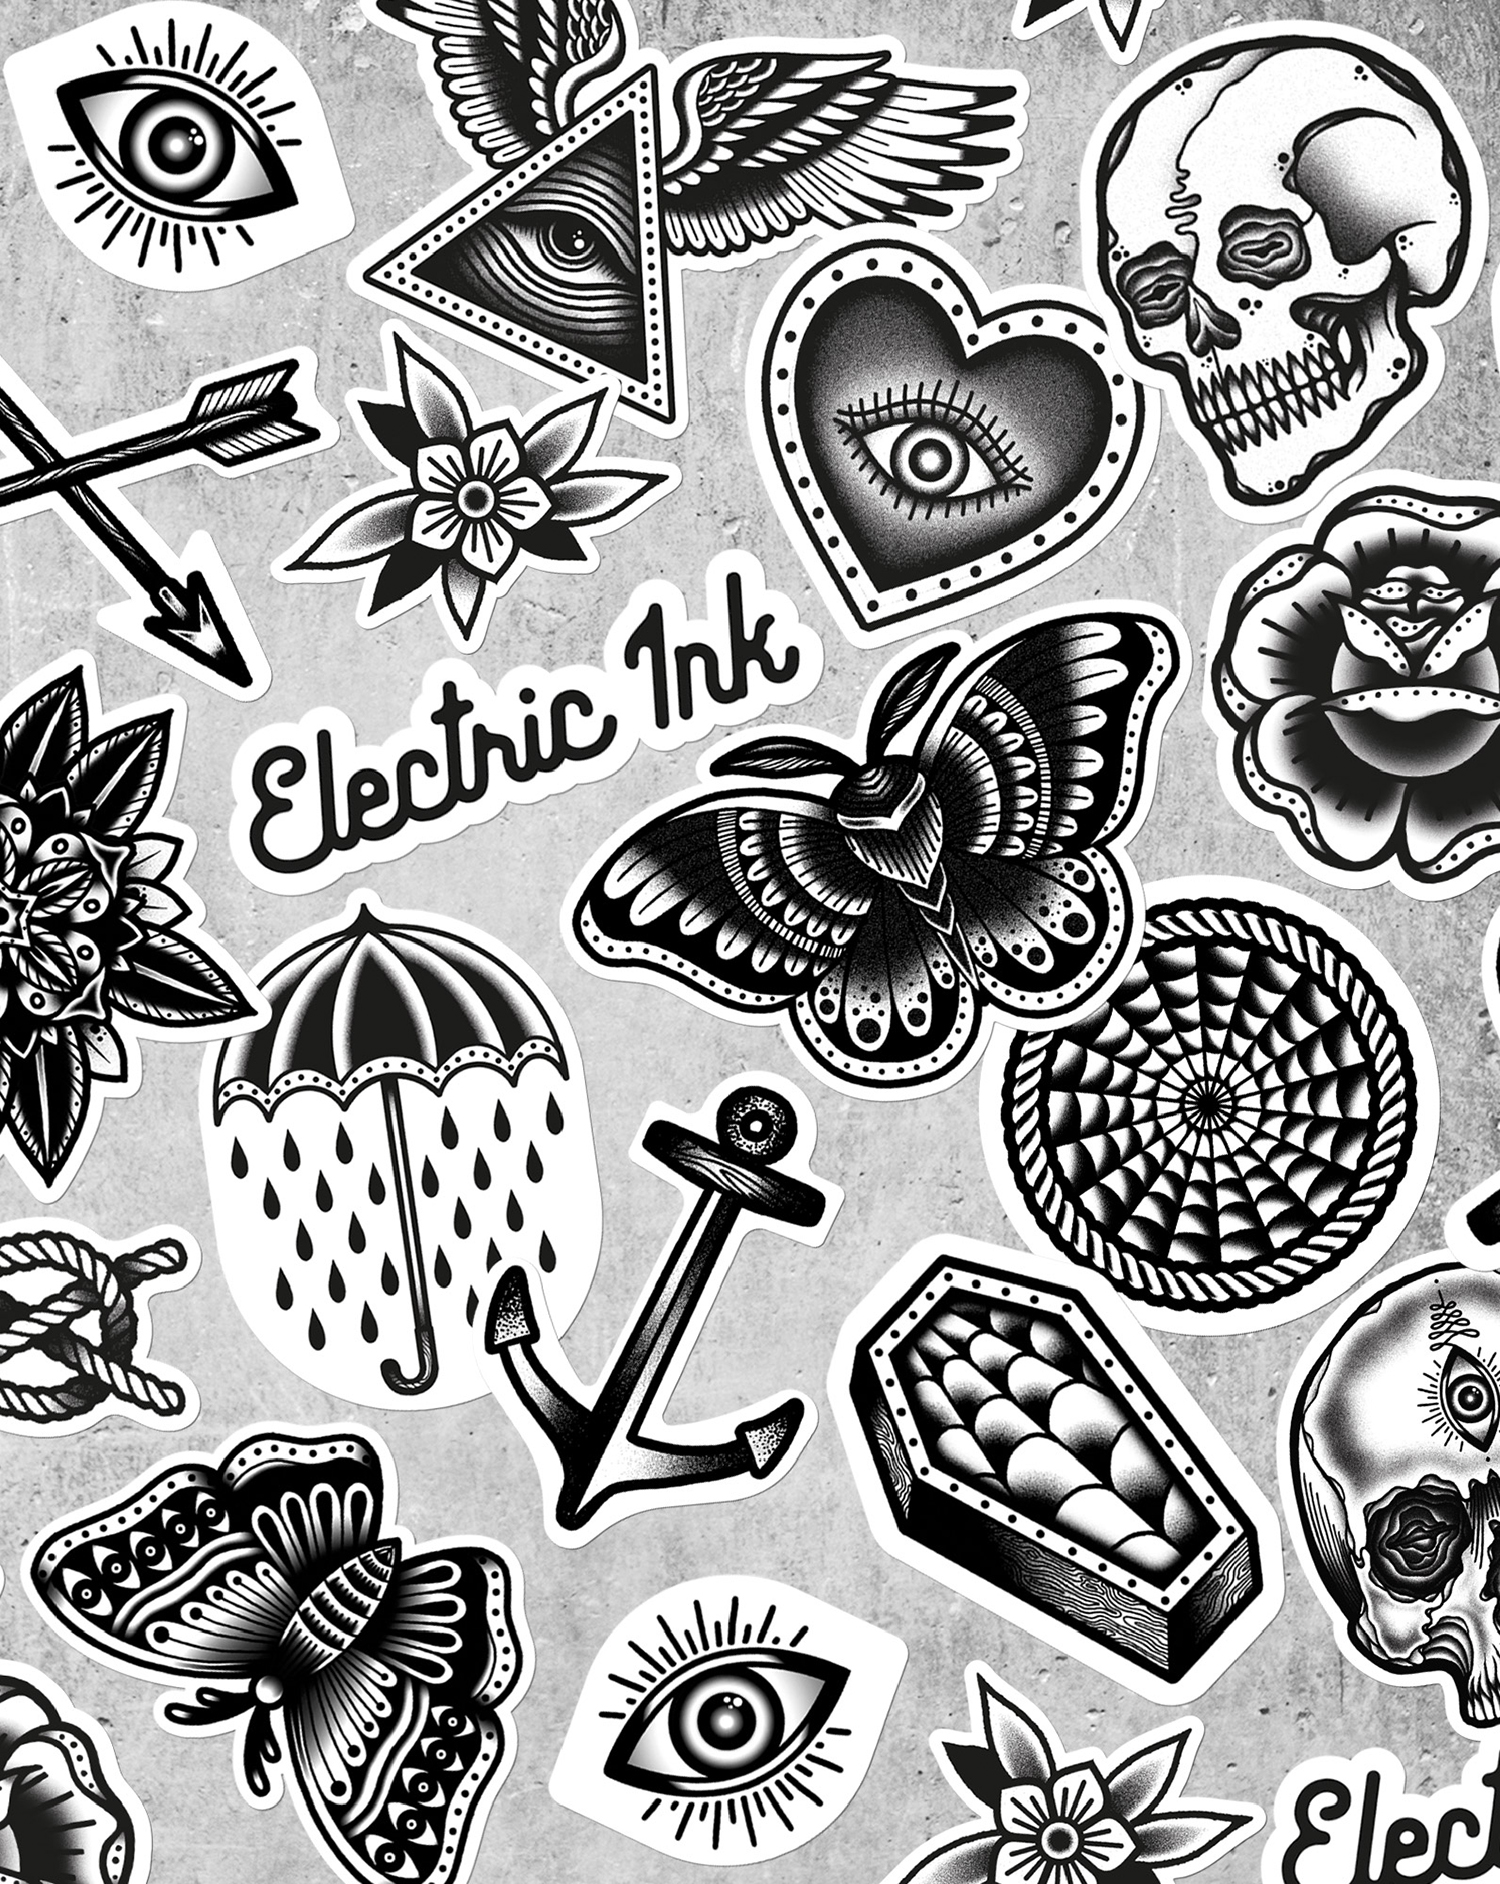 Brand identity and sticker design for tattoo care range Electric Ink by Leeds-based design studio Robot Food.